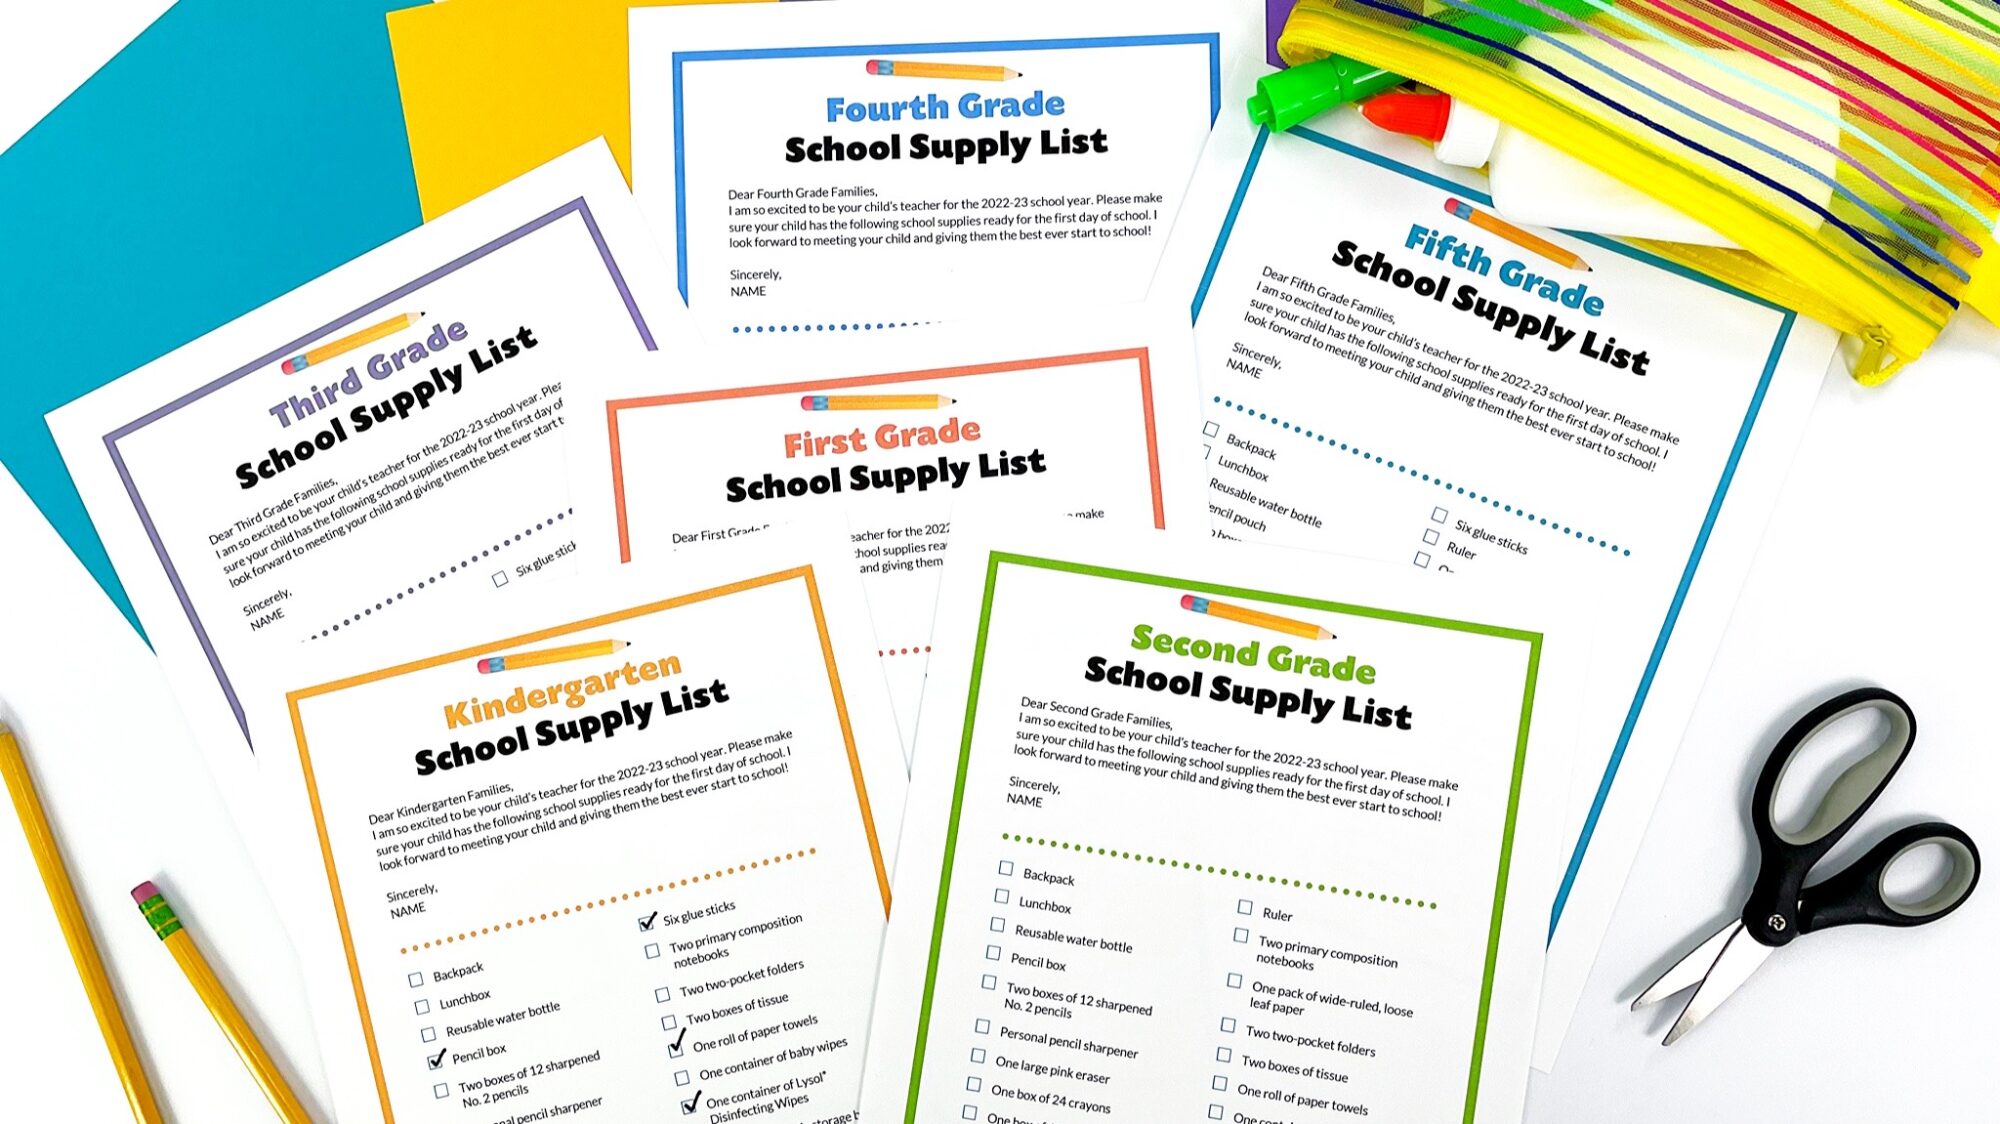 get-these-free-school-supply-lists-one-for-each-grade-k-5